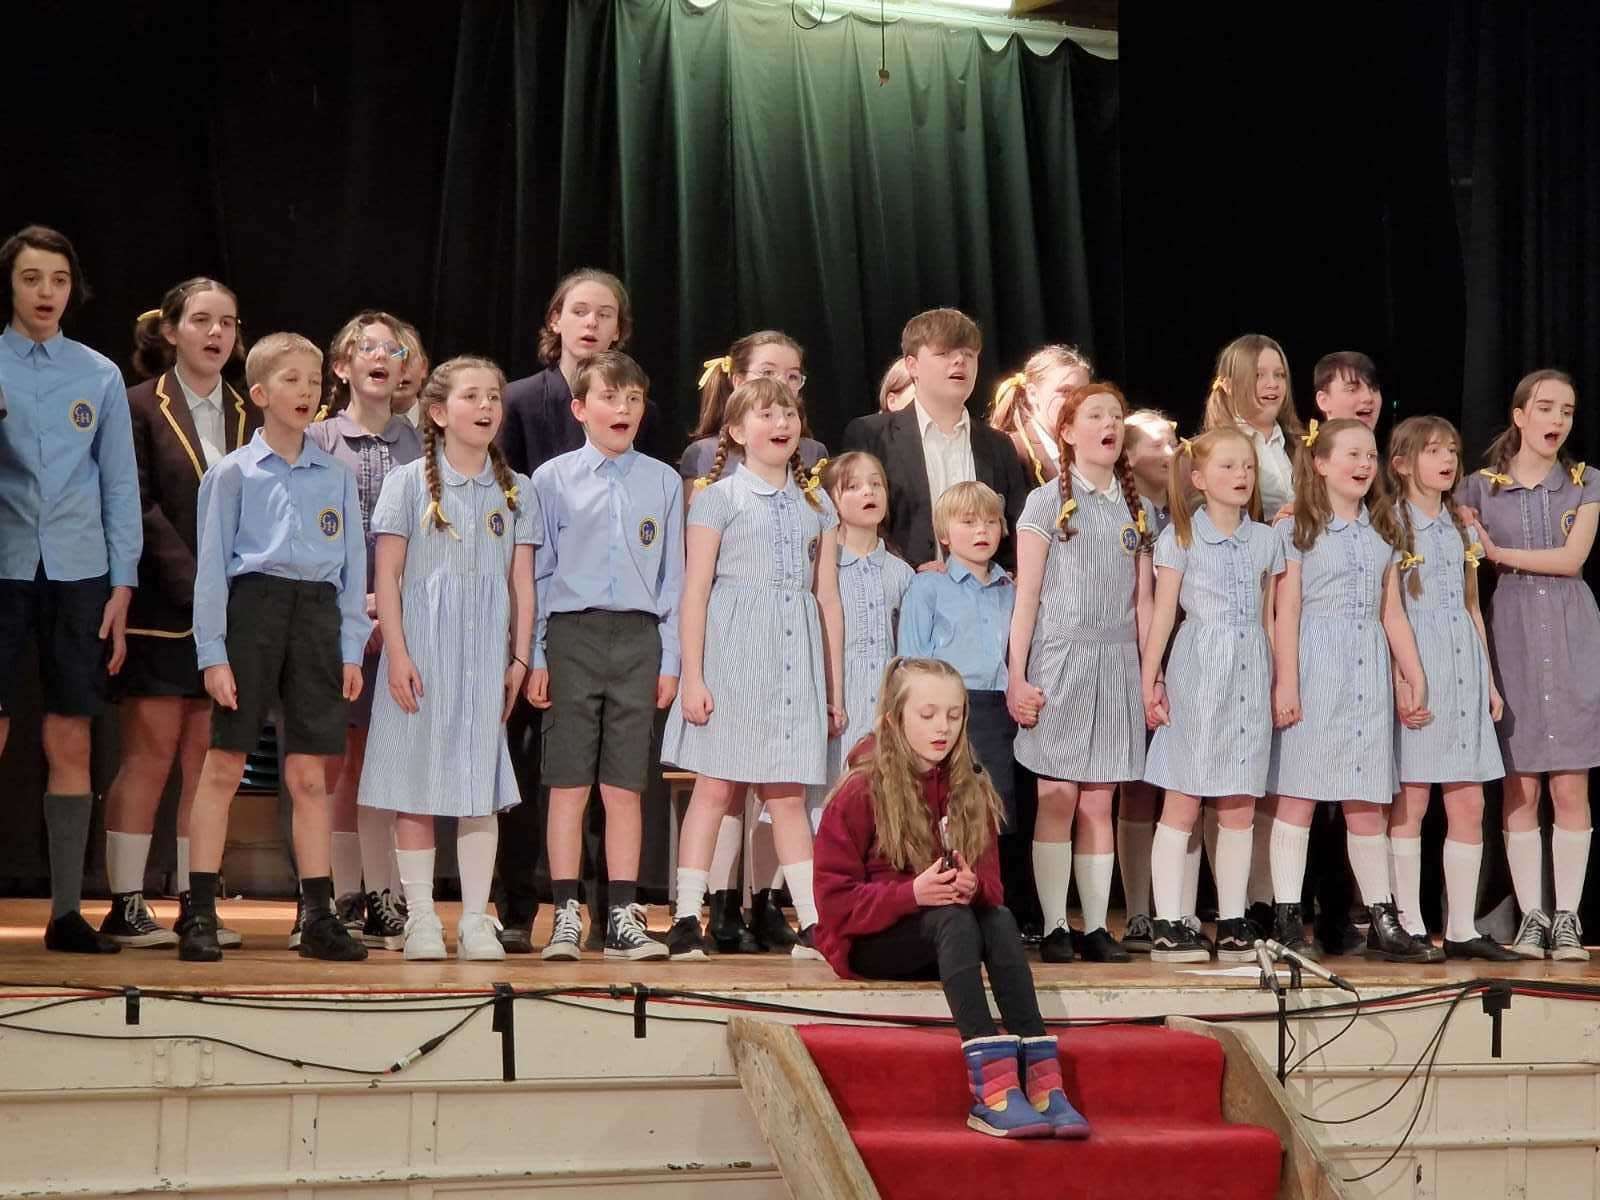 Forres Youth Theatre's performance at this year's Forres Youth Concert.